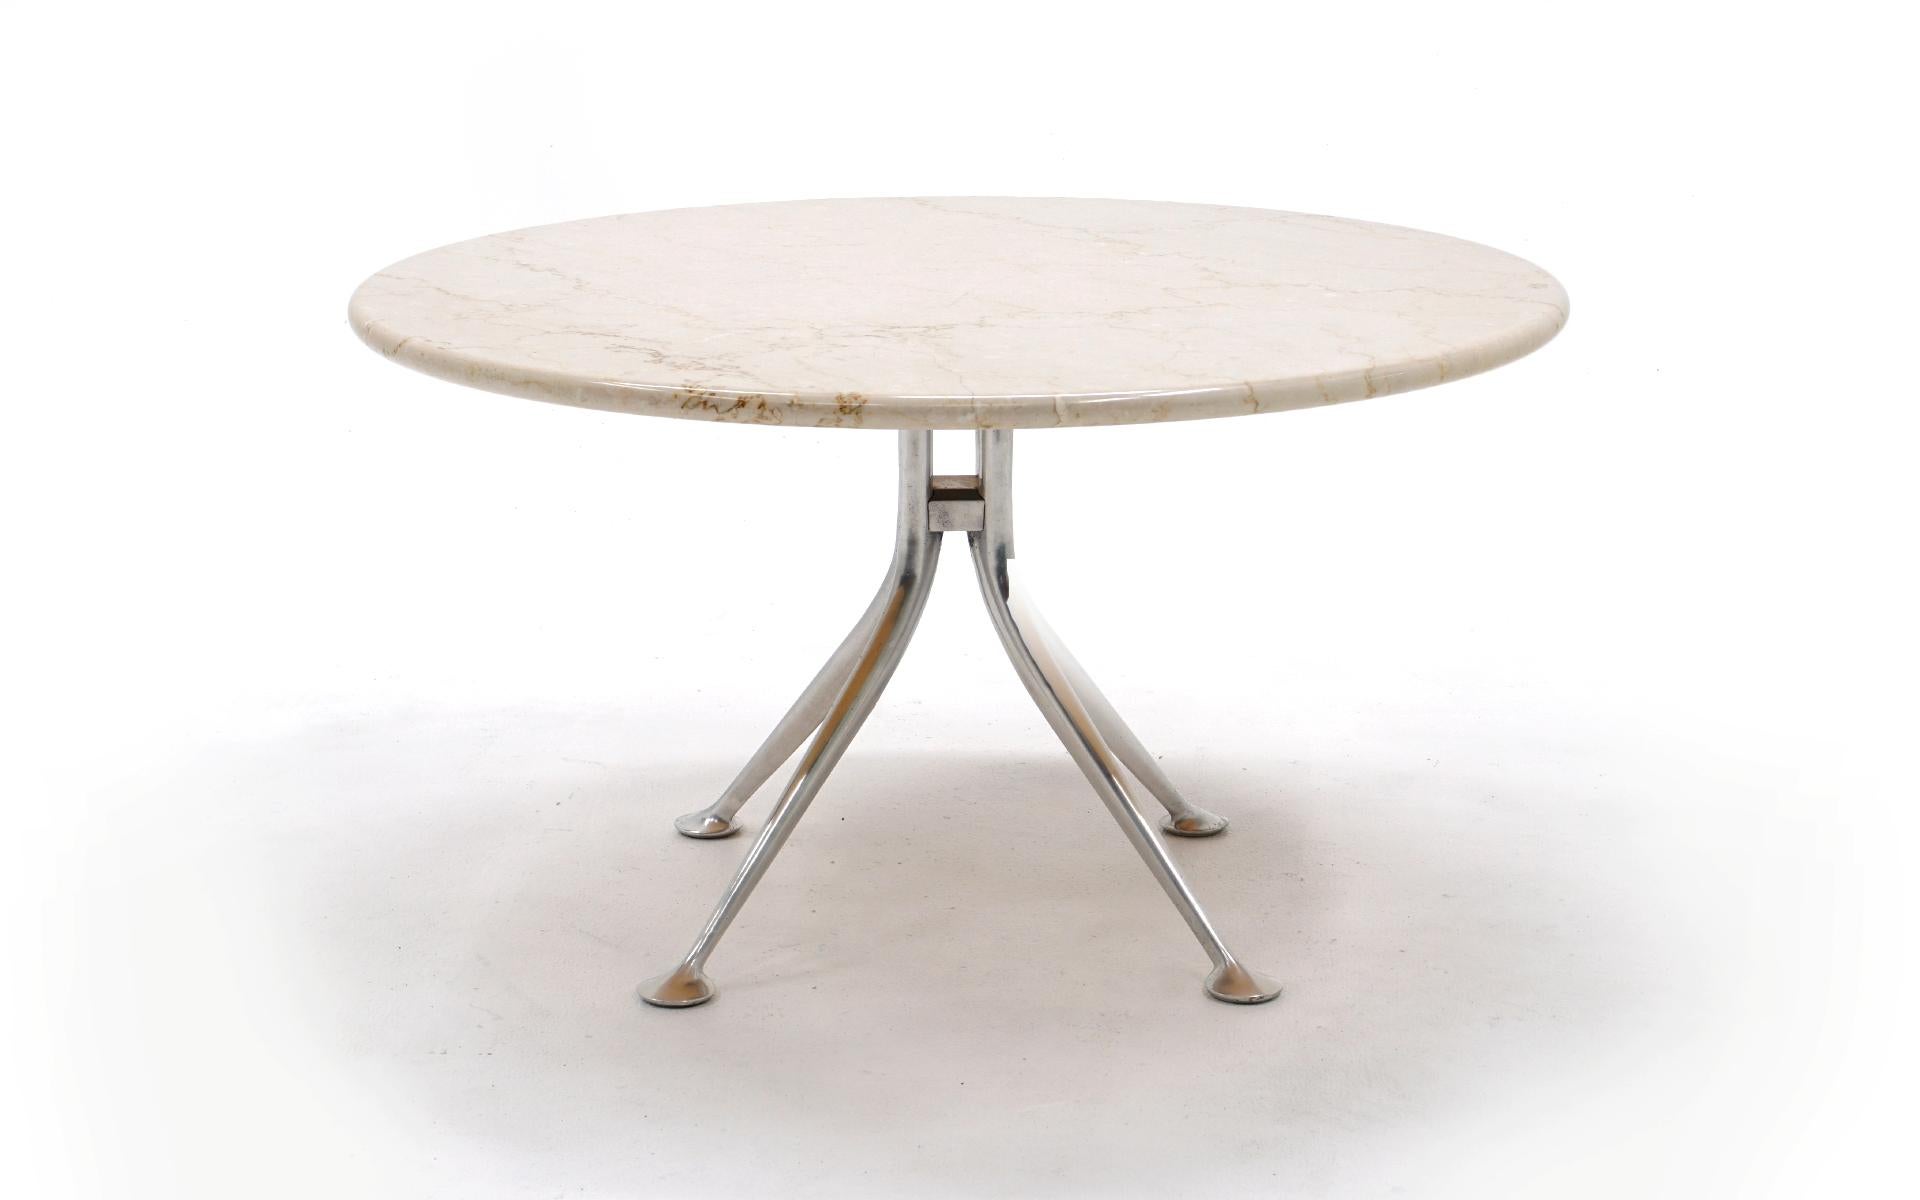 Alexander Girard for Herman Miller round marble table in very good condition. Only available for one year in 1967. This is an original production, not a reissue. Very good condition with signs of light use. No chips, cracks, or repairs. Ready to use.